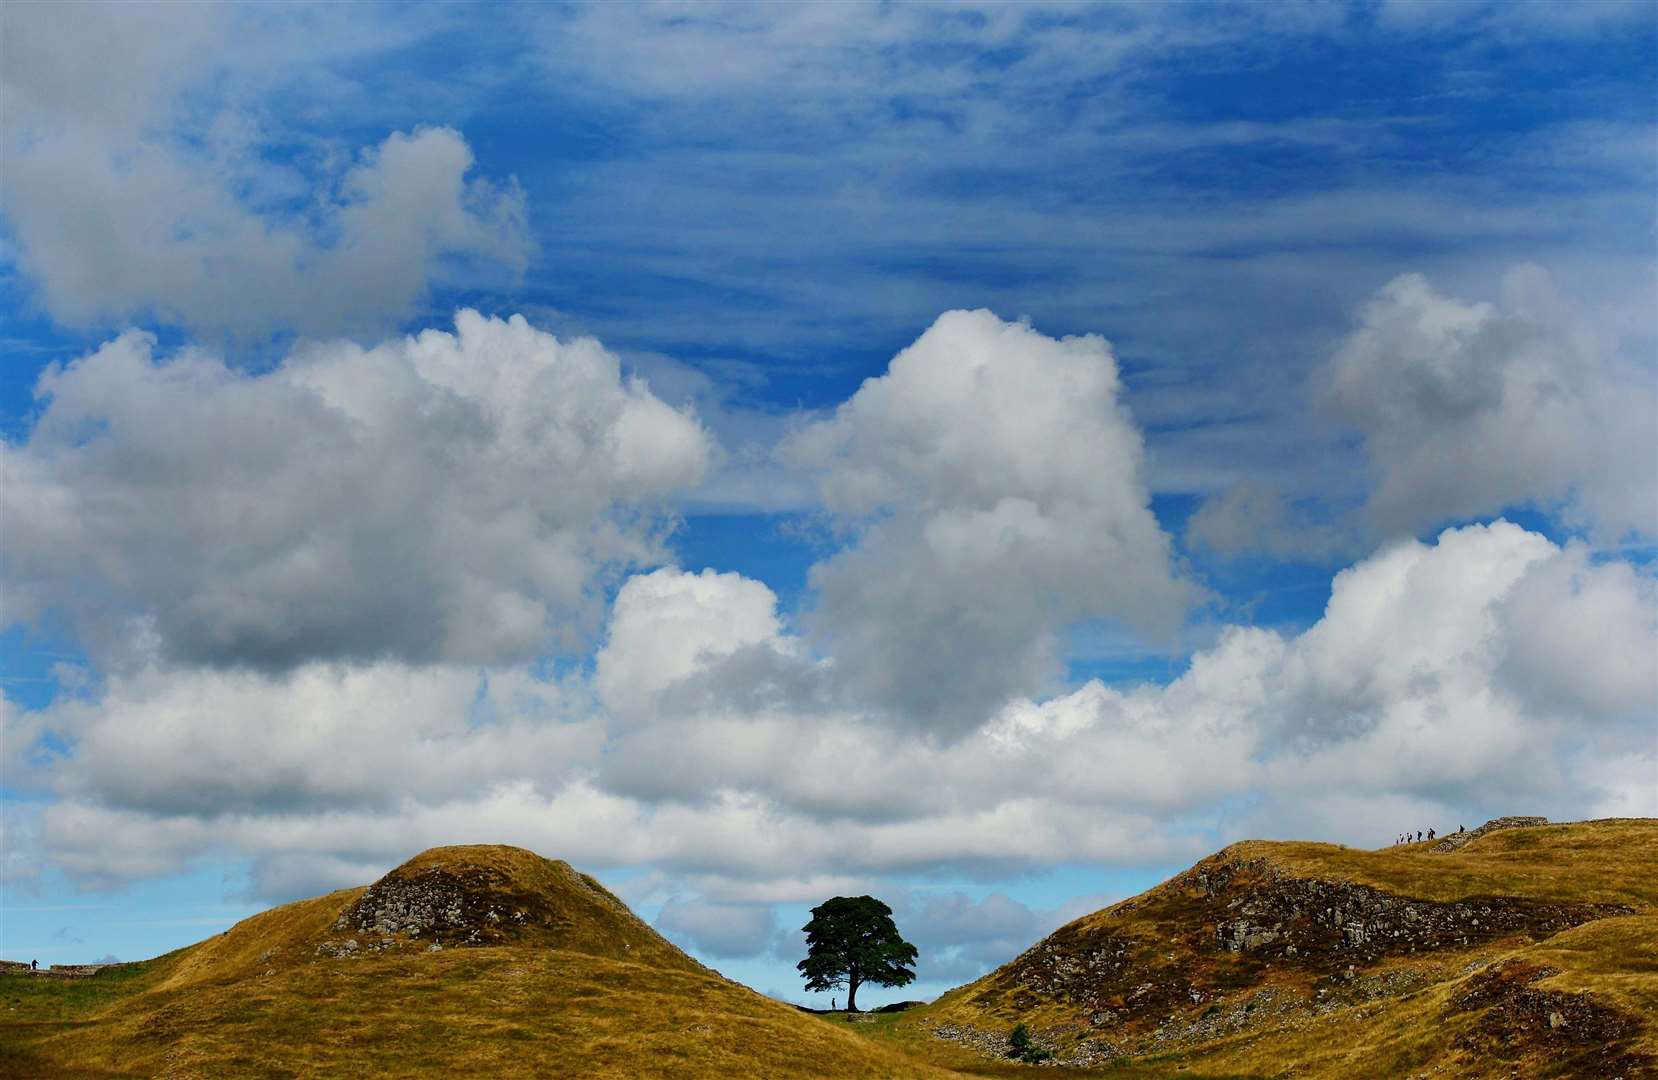 The eponymous tree could be found at Sycamore Gap at Hadrian’s Wall (Owen Humphreys/PA)